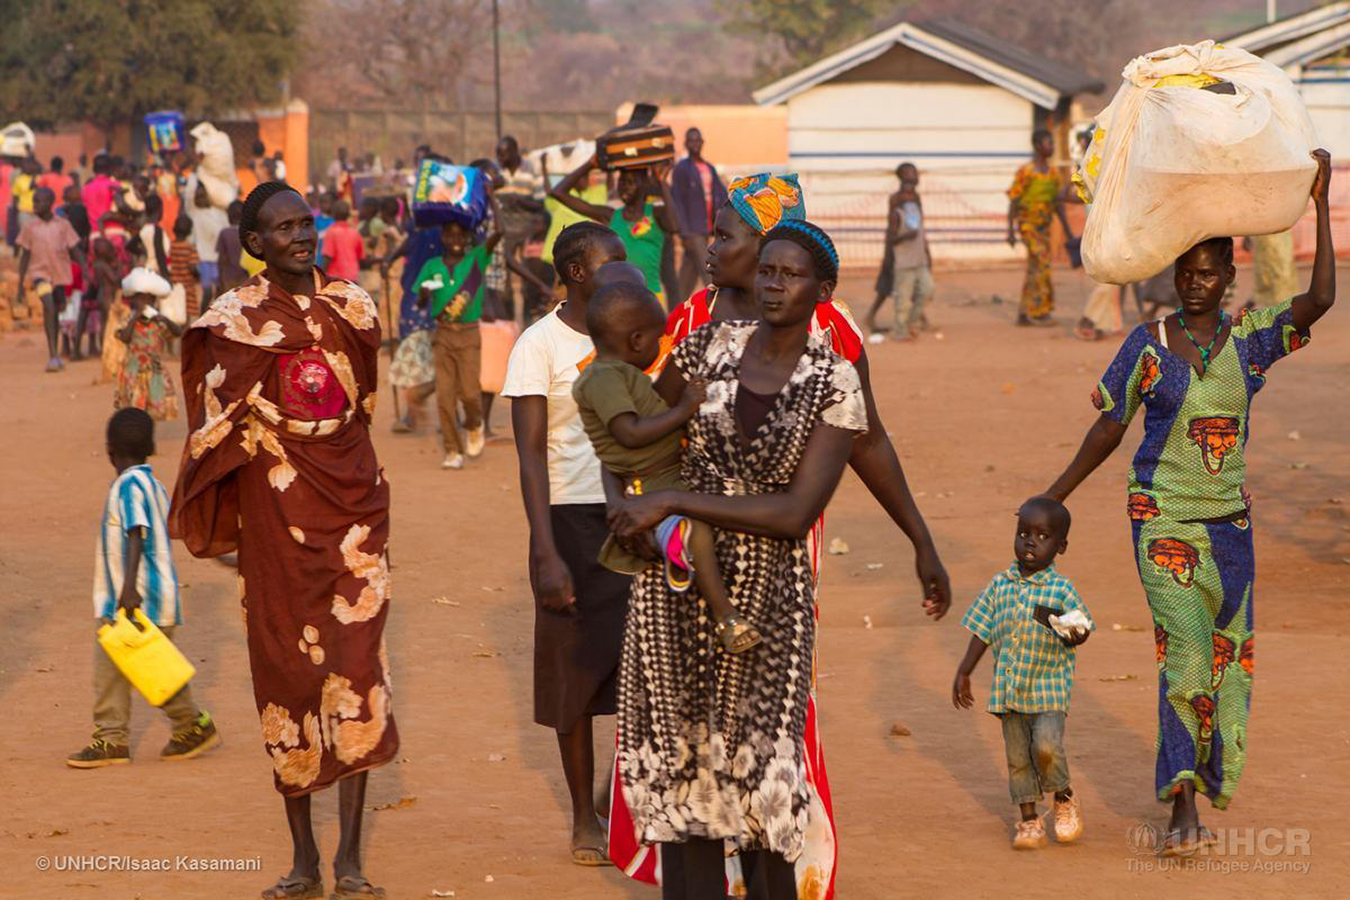 Newly arrived South Sudanese refugees carry their belongings at the Nyumanzi reception center in Adjumani, a district in northern Uganda. Since the first week of January 2016, Uganda has seen an influx of 4,587 refugees from the neighboring war-torn country of South Sudan. | Photo courtesy © UNHCR/Isaac Kasamani